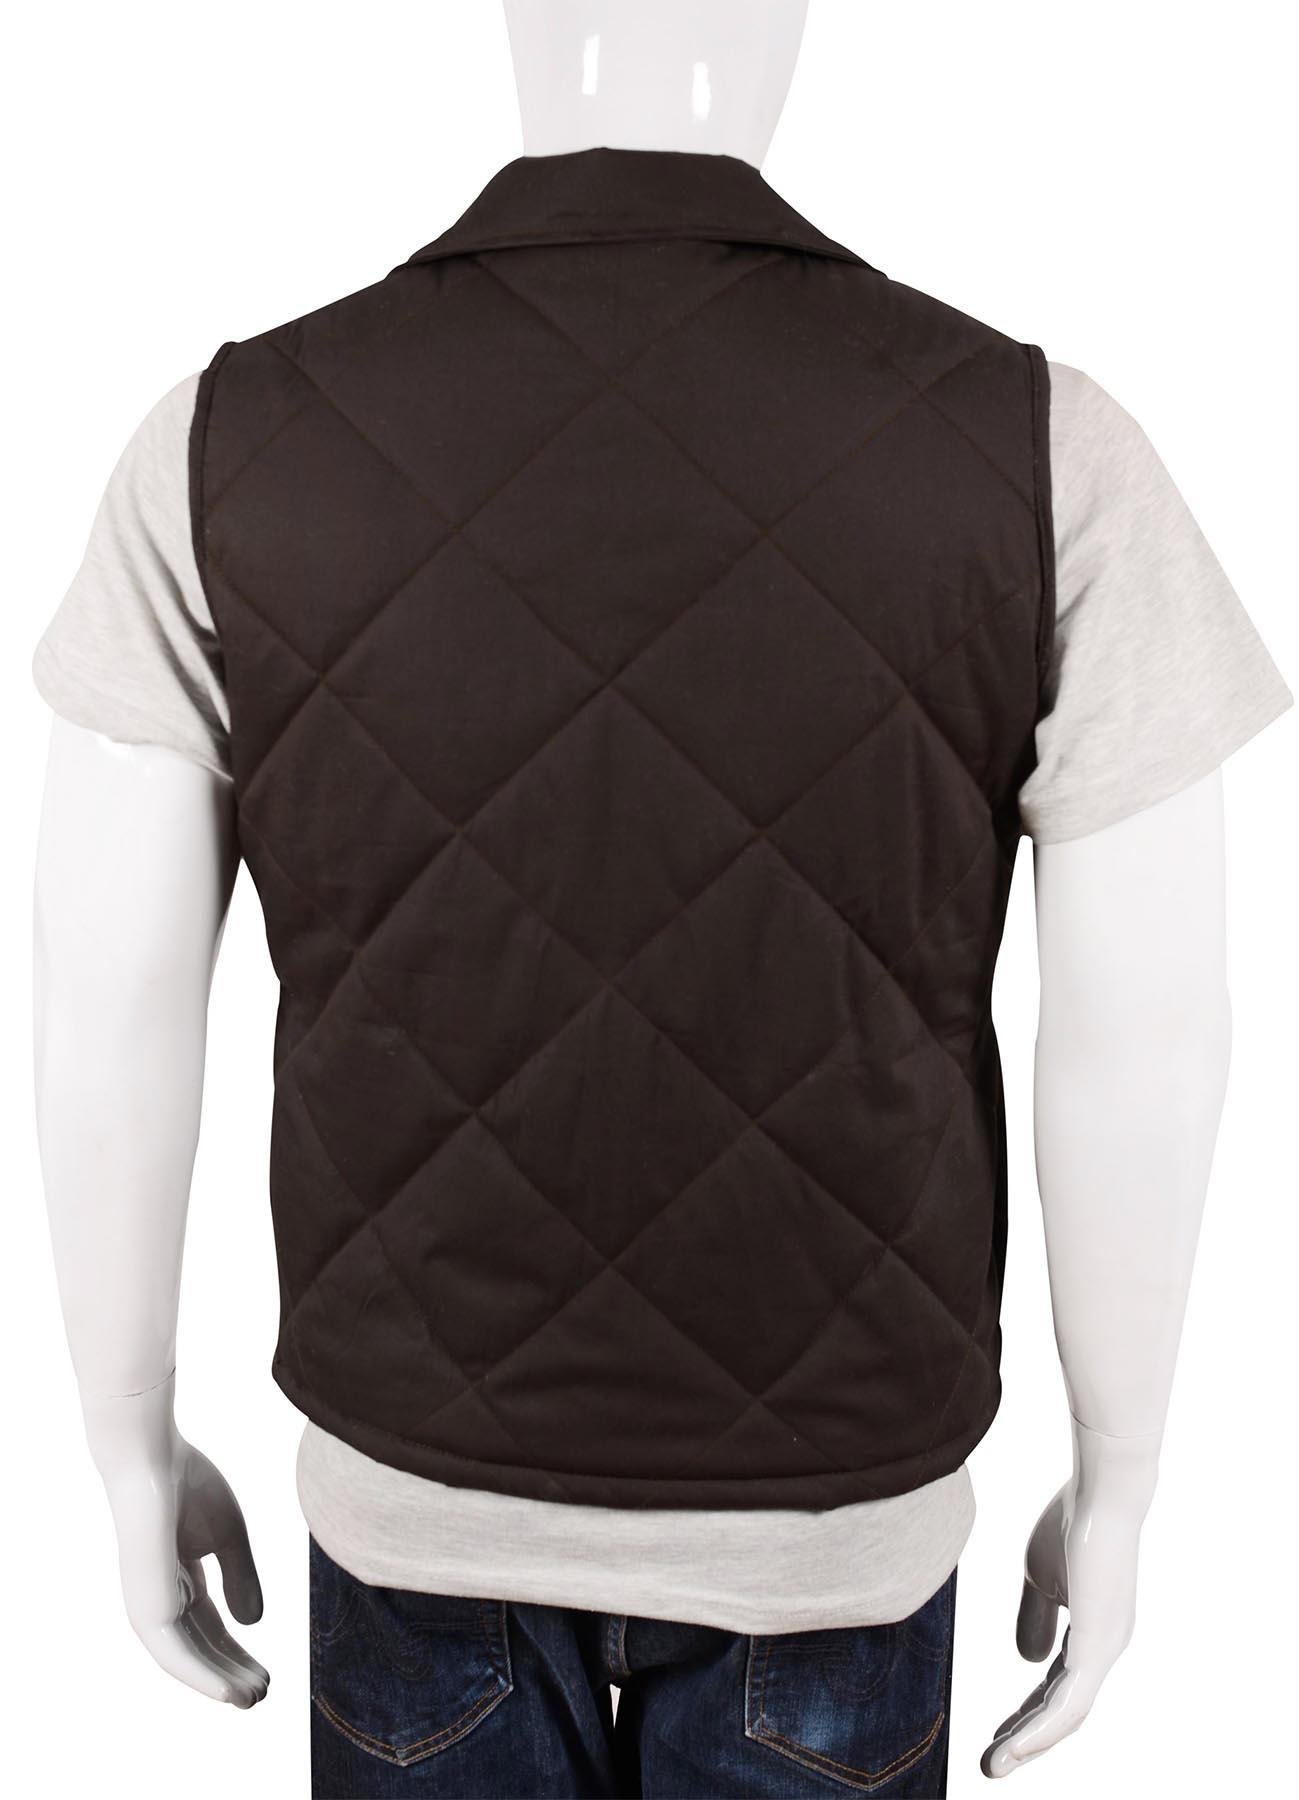 Kevin Costner Yellowstone Quilted Vest